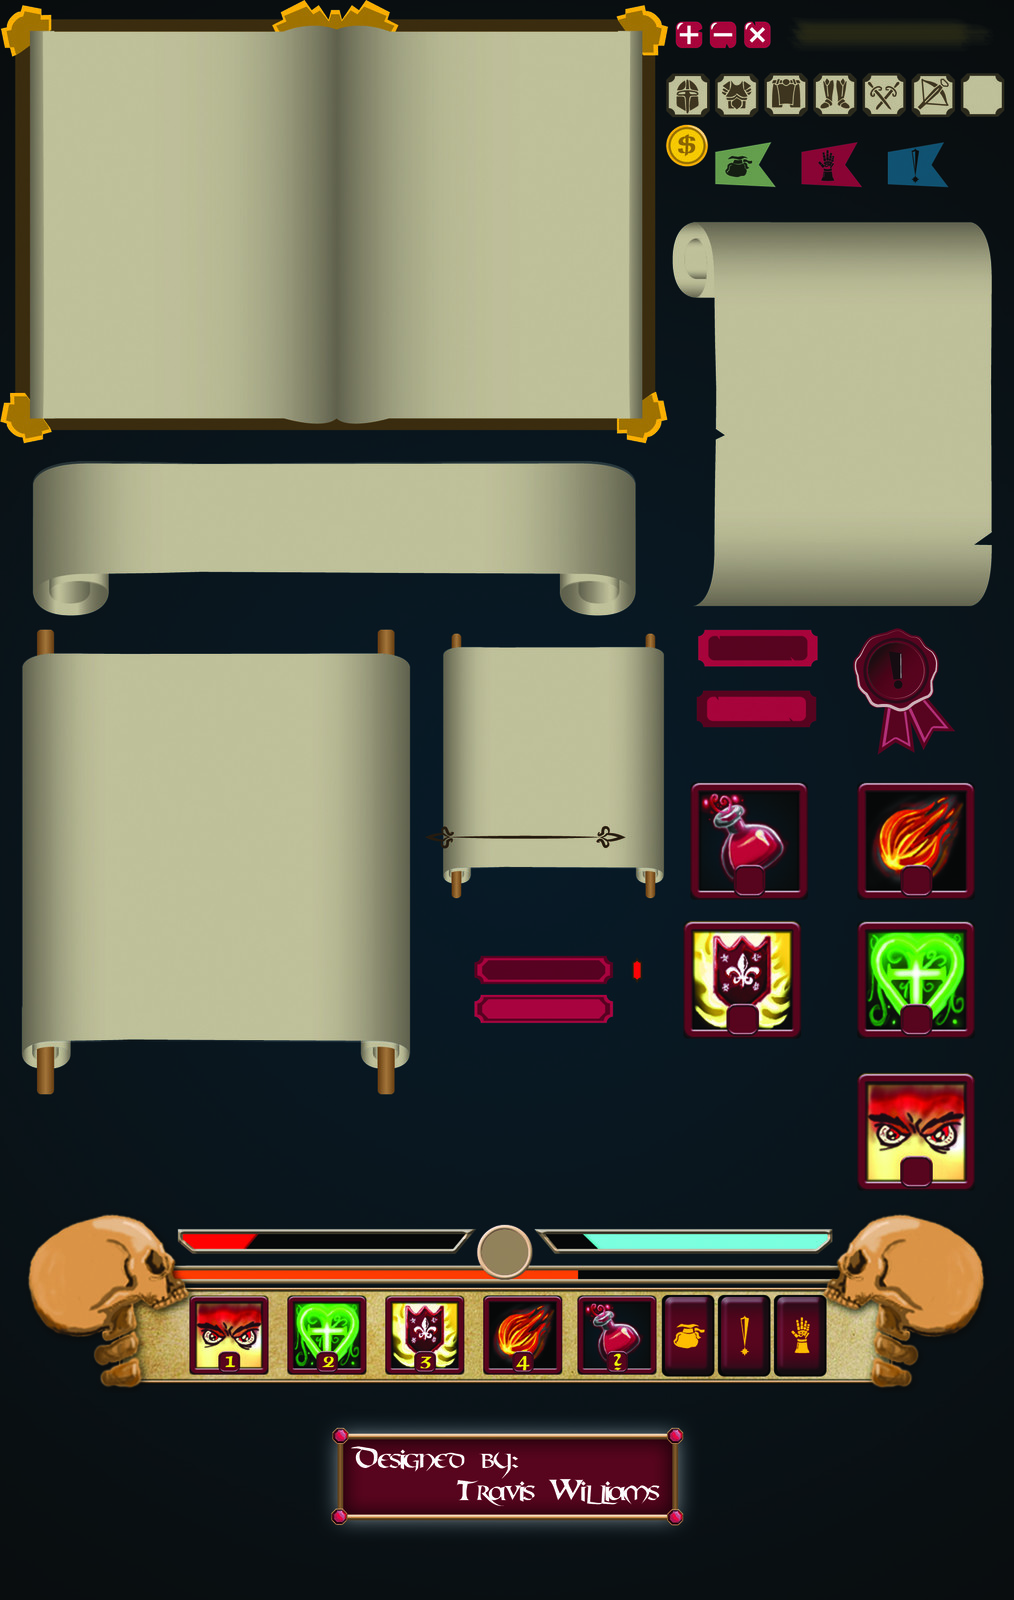 All of the UI elements that I designed and delivered to be implemented into the game. From menus and the action bars and buttons. 